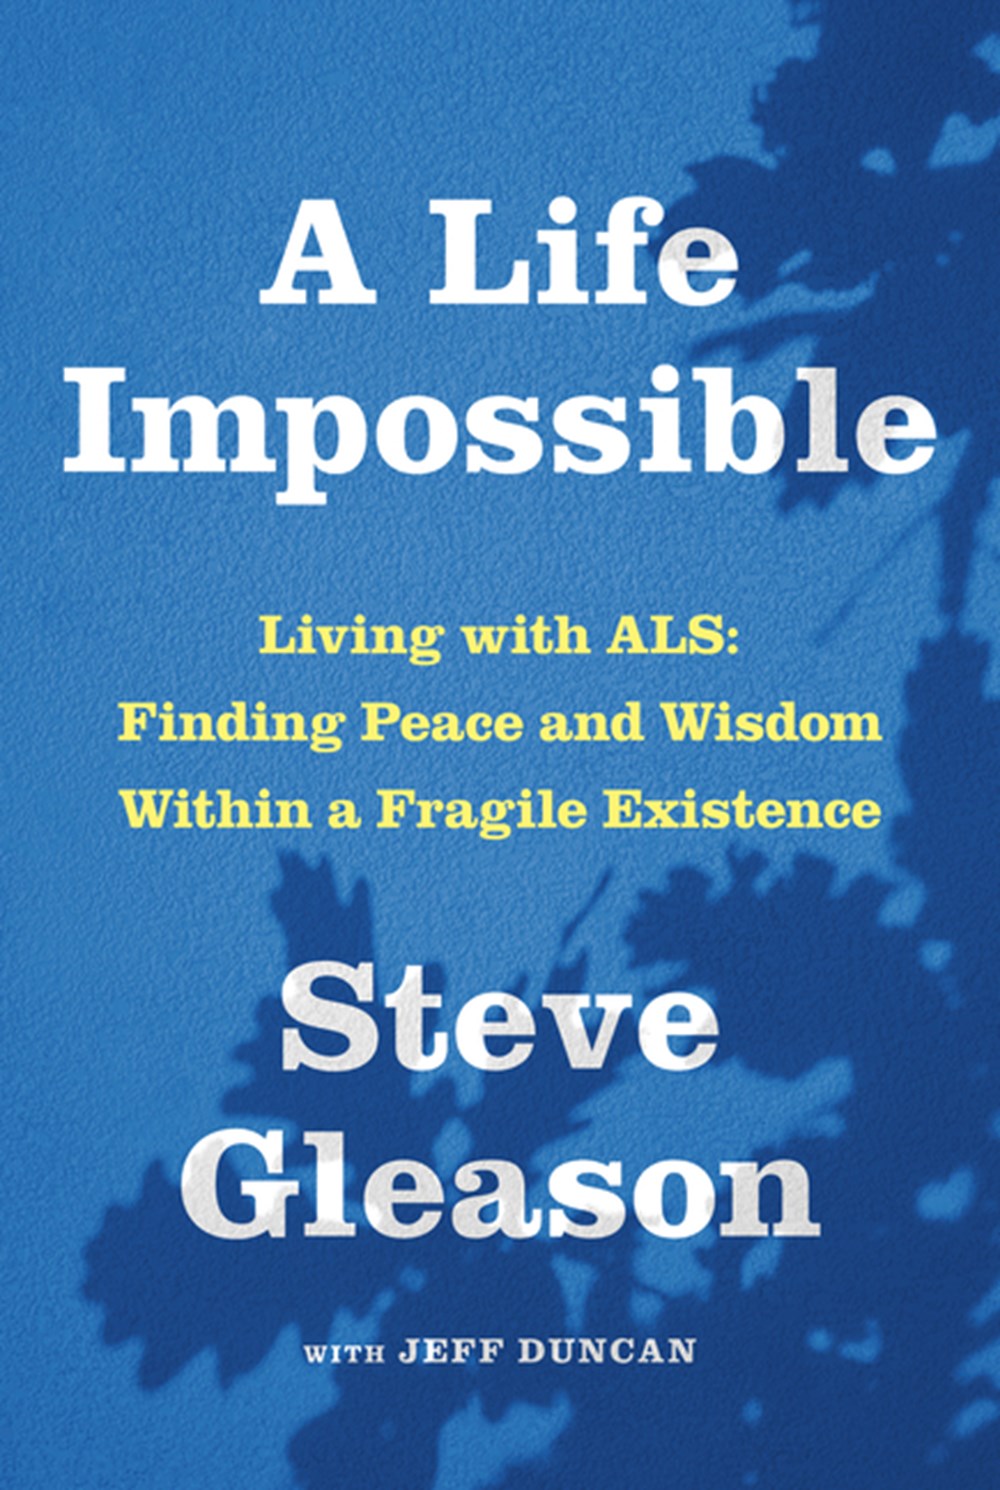 Life Impossible Living with Als: Finding Peace and Wisdom Within a Fragile Existence